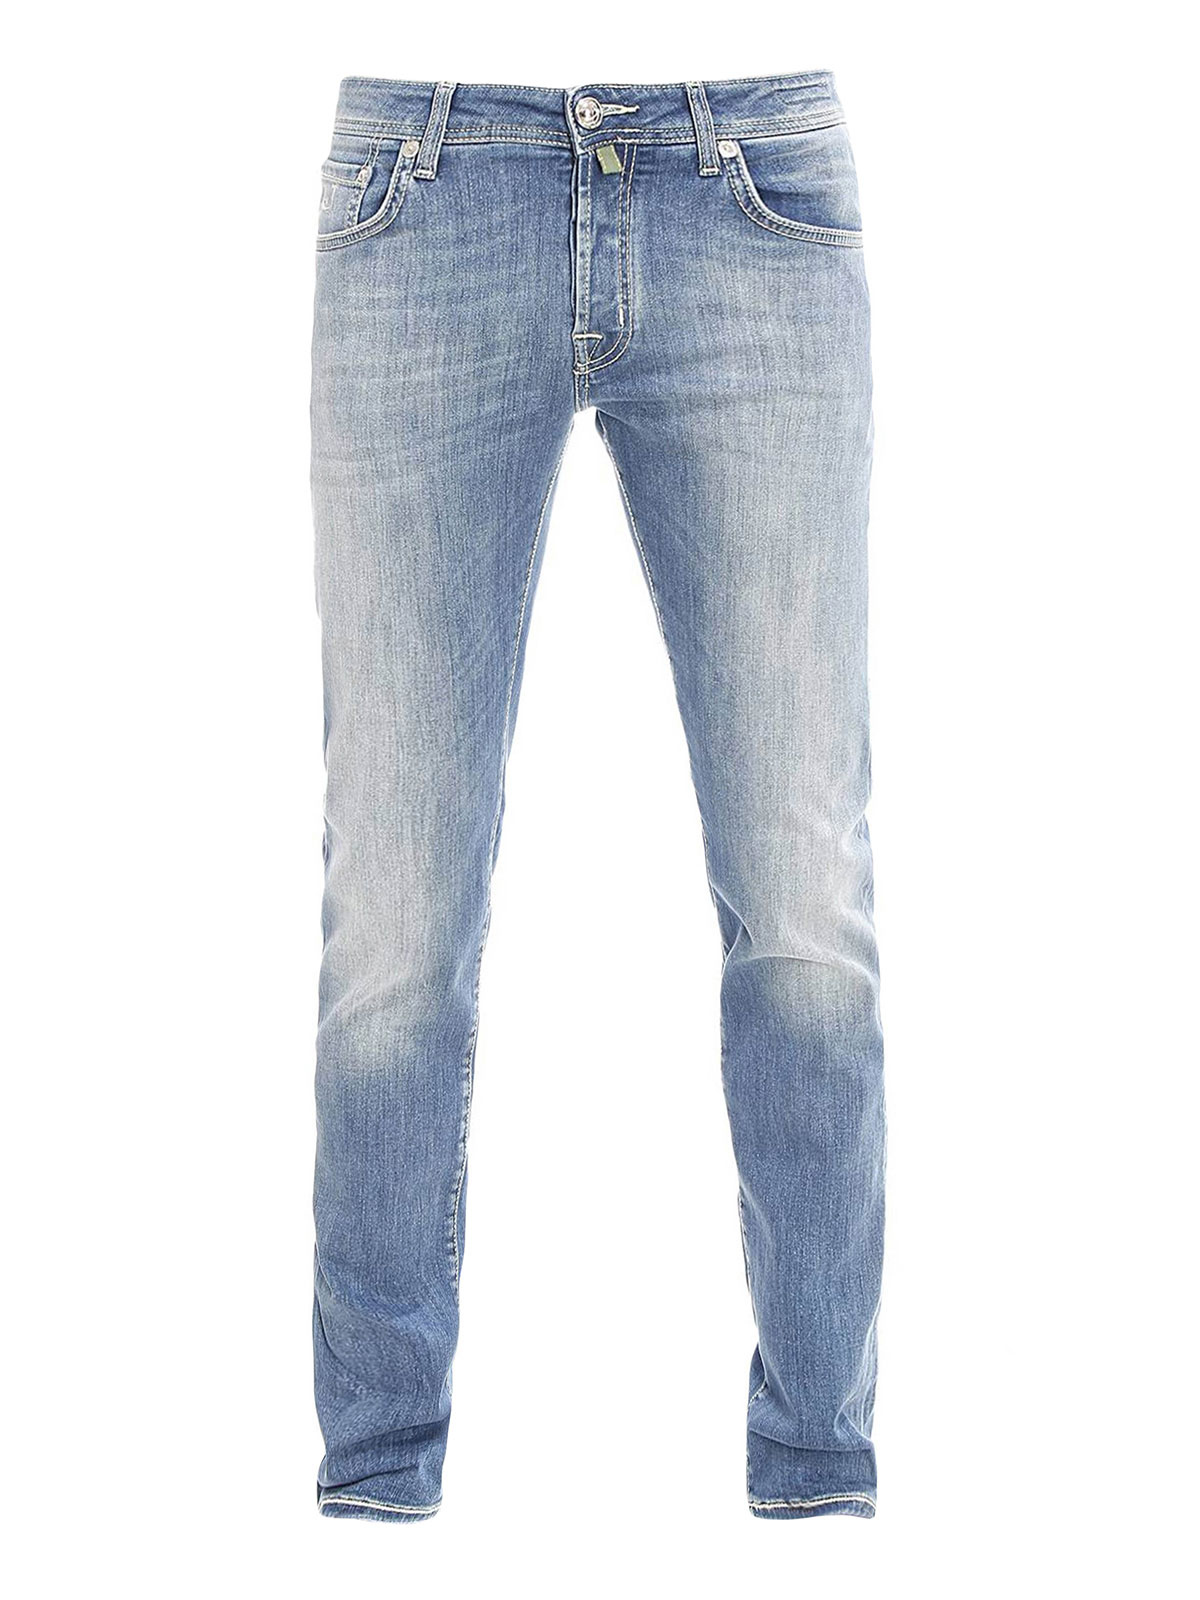 Jacob Cohen - Faded jeans - straight leg jeans - PW622COMF00012